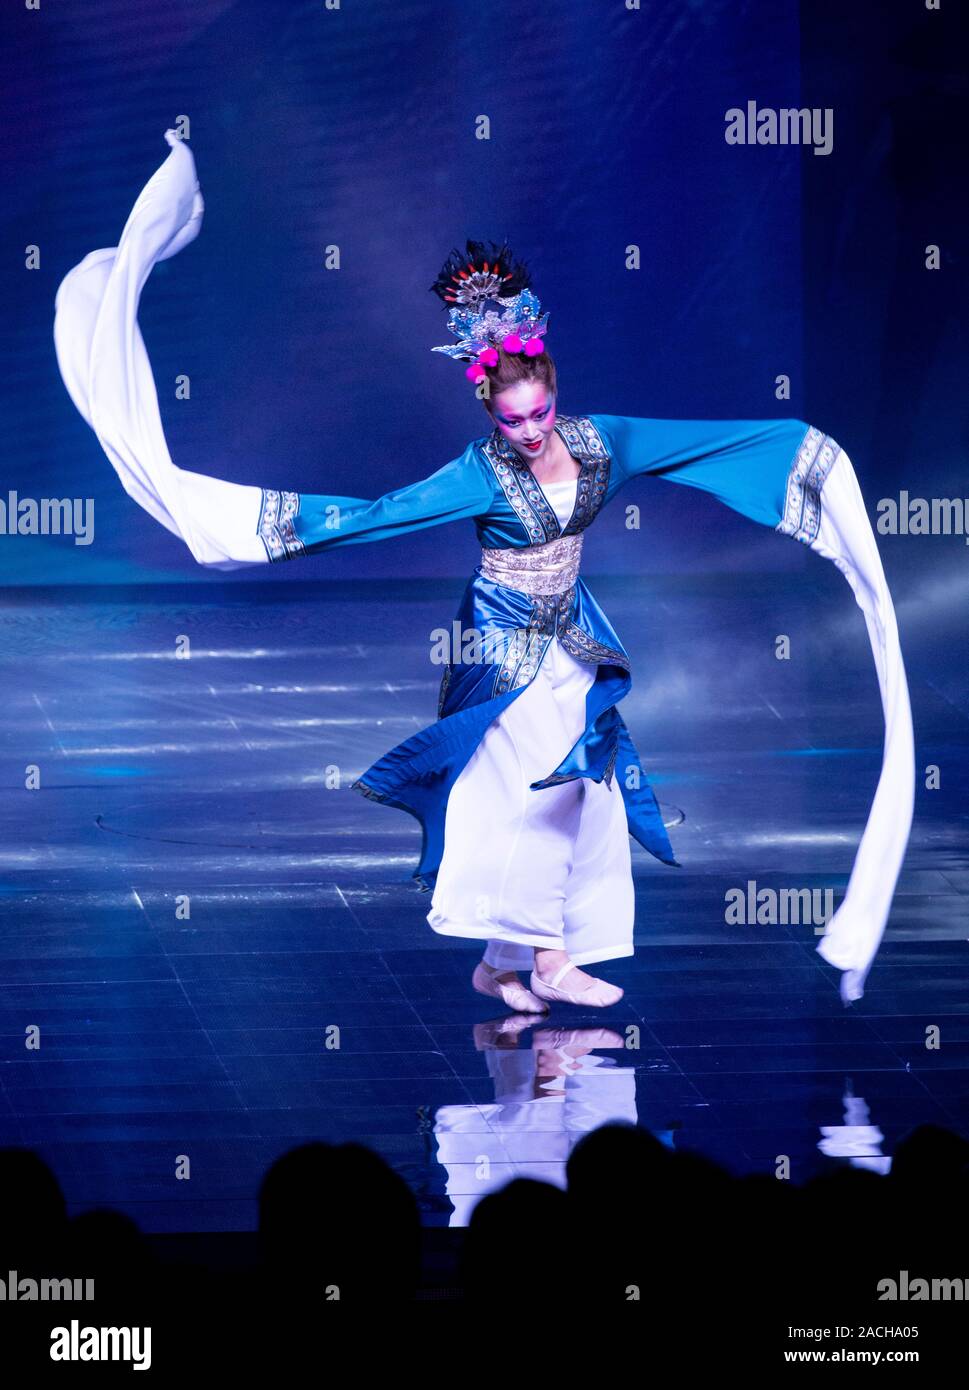 HONG KONG,CHINA: DECEMBER 2,2019 AFC Annual Awards. Traditional Chinese Long Sleeve dance.Jayne Russell/Alamy stock image Stock Photo